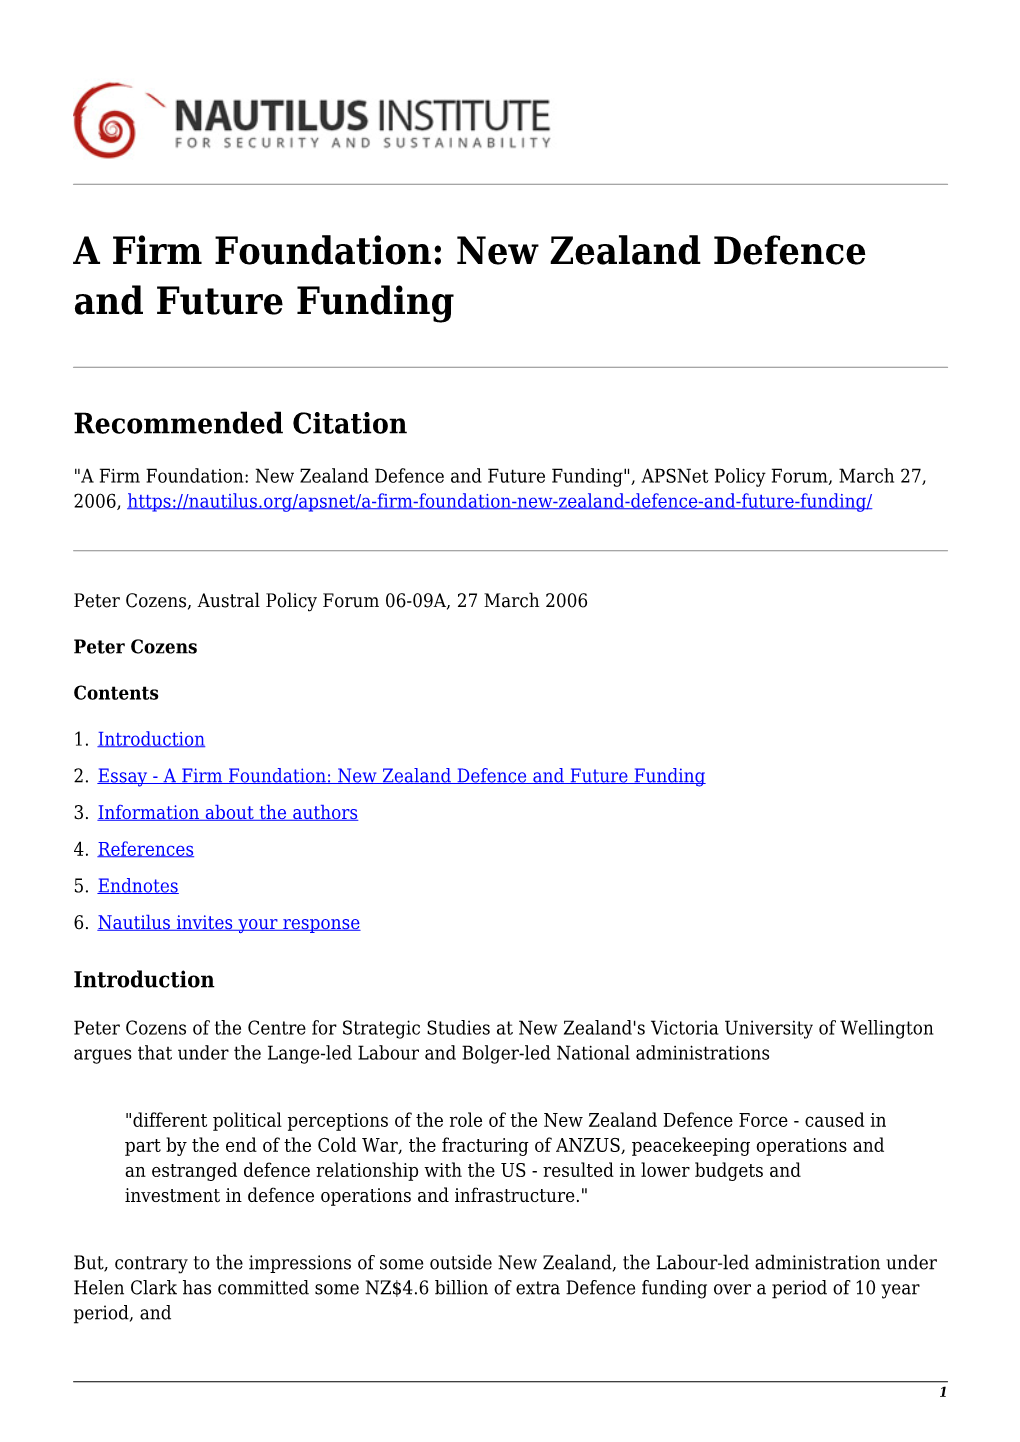 A Firm Foundation: New Zealand Defence and Future Funding